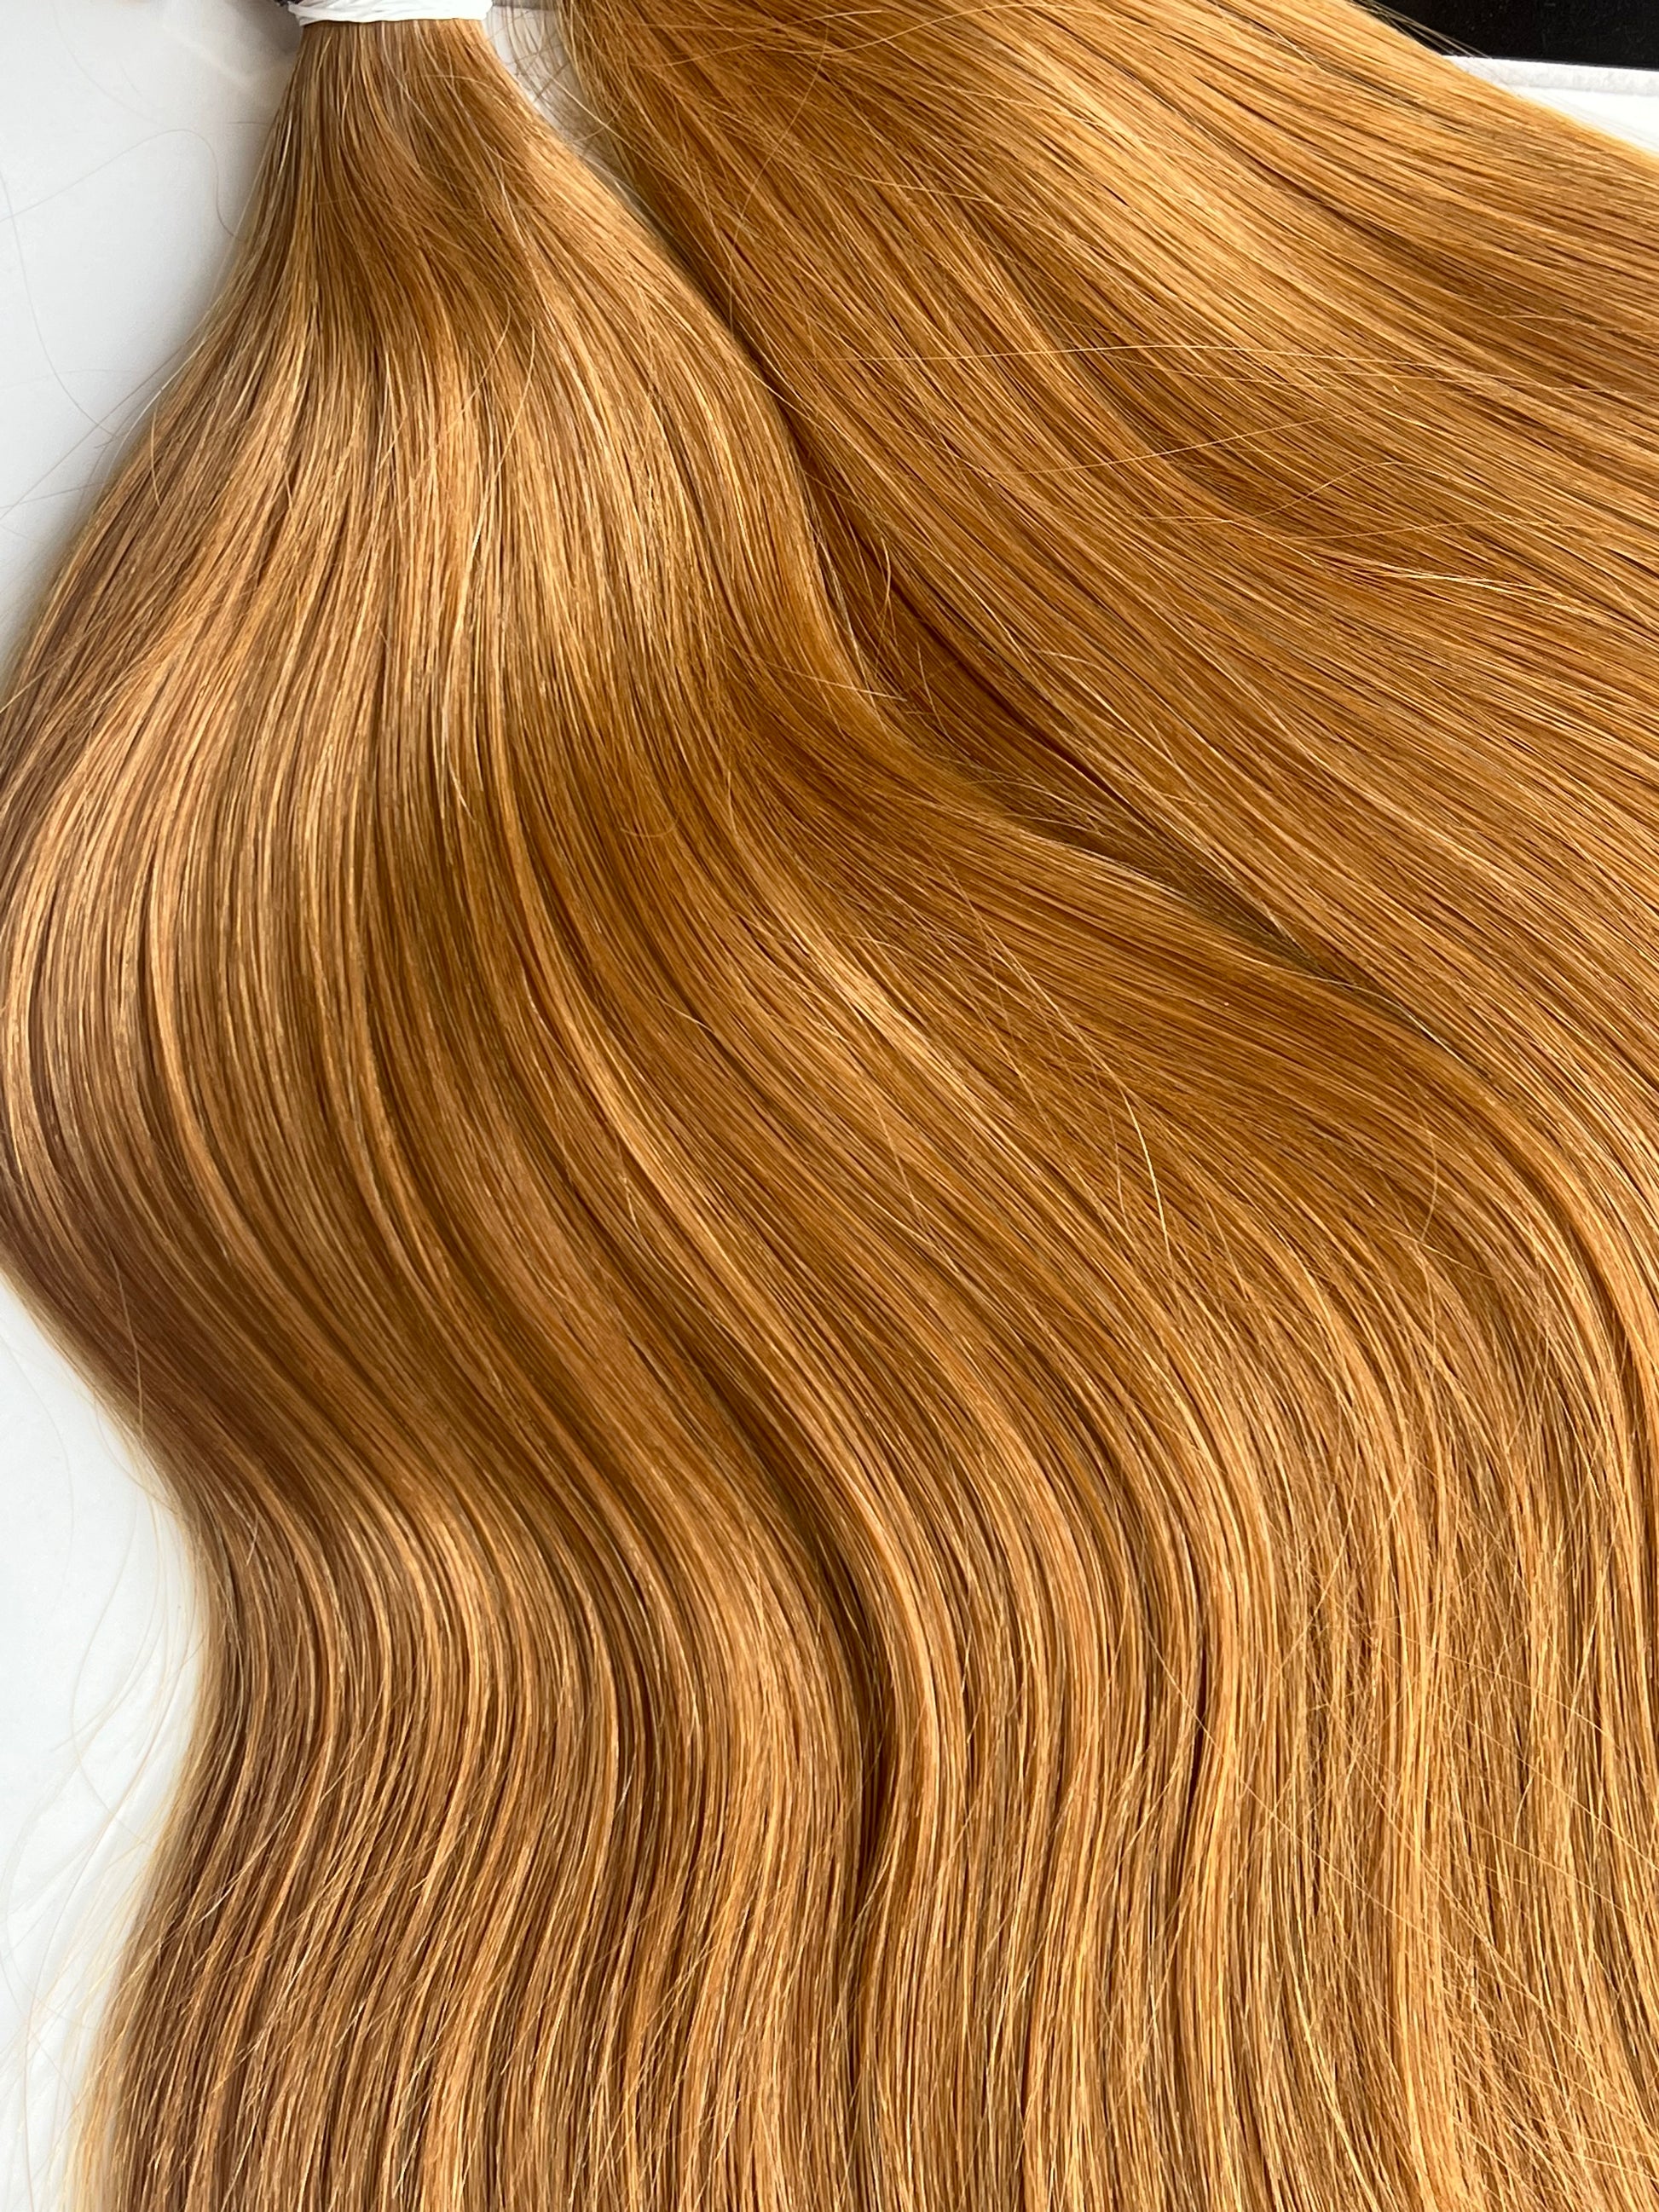 20” Tape in Hair Extensions - Shade Auburn 30 - Ladylux